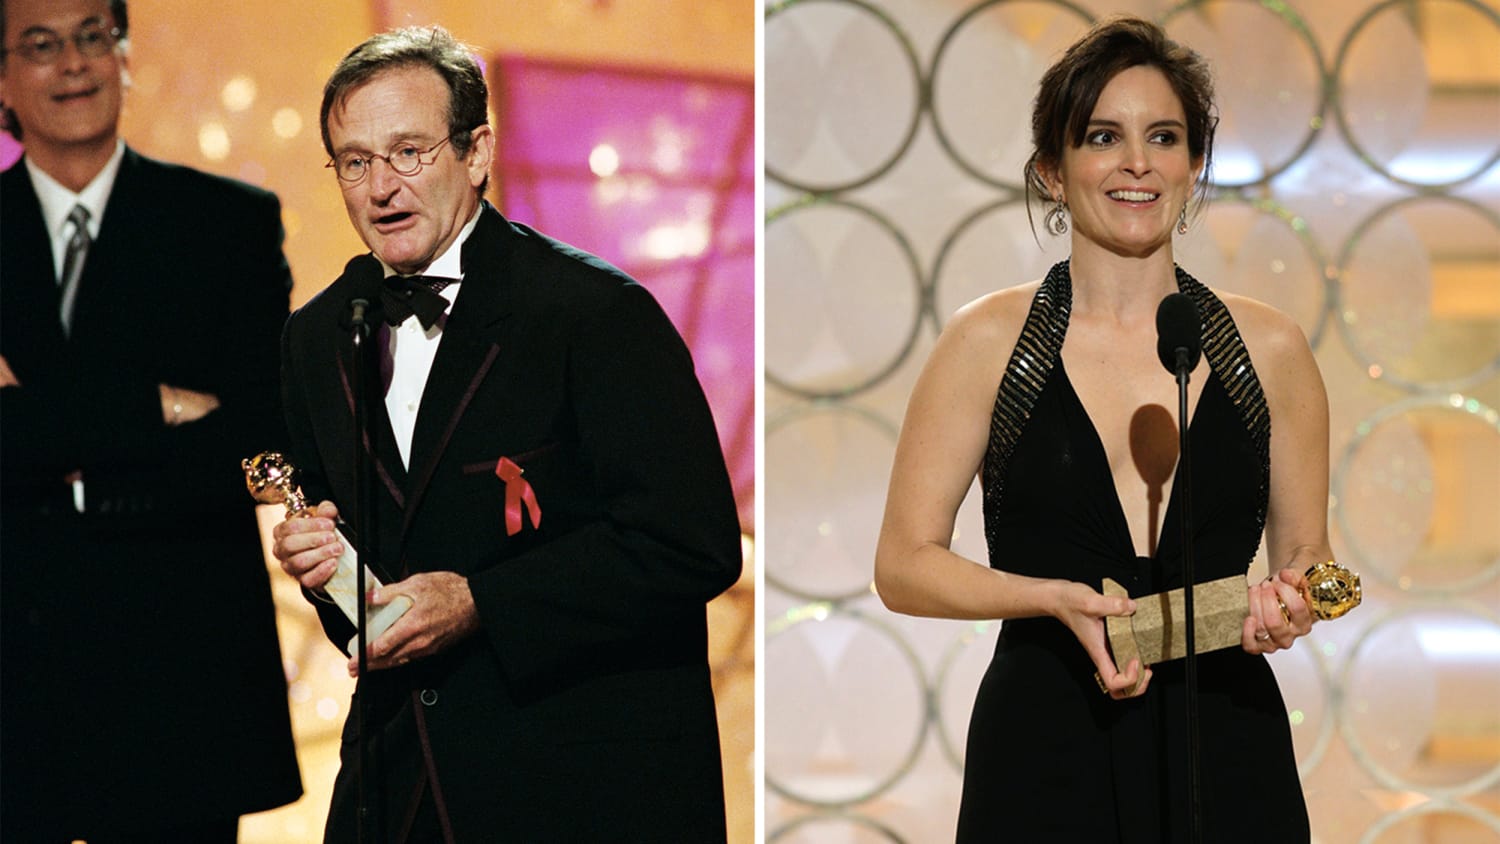 The funniest Golden Globes acceptance speeches of the past 25 years